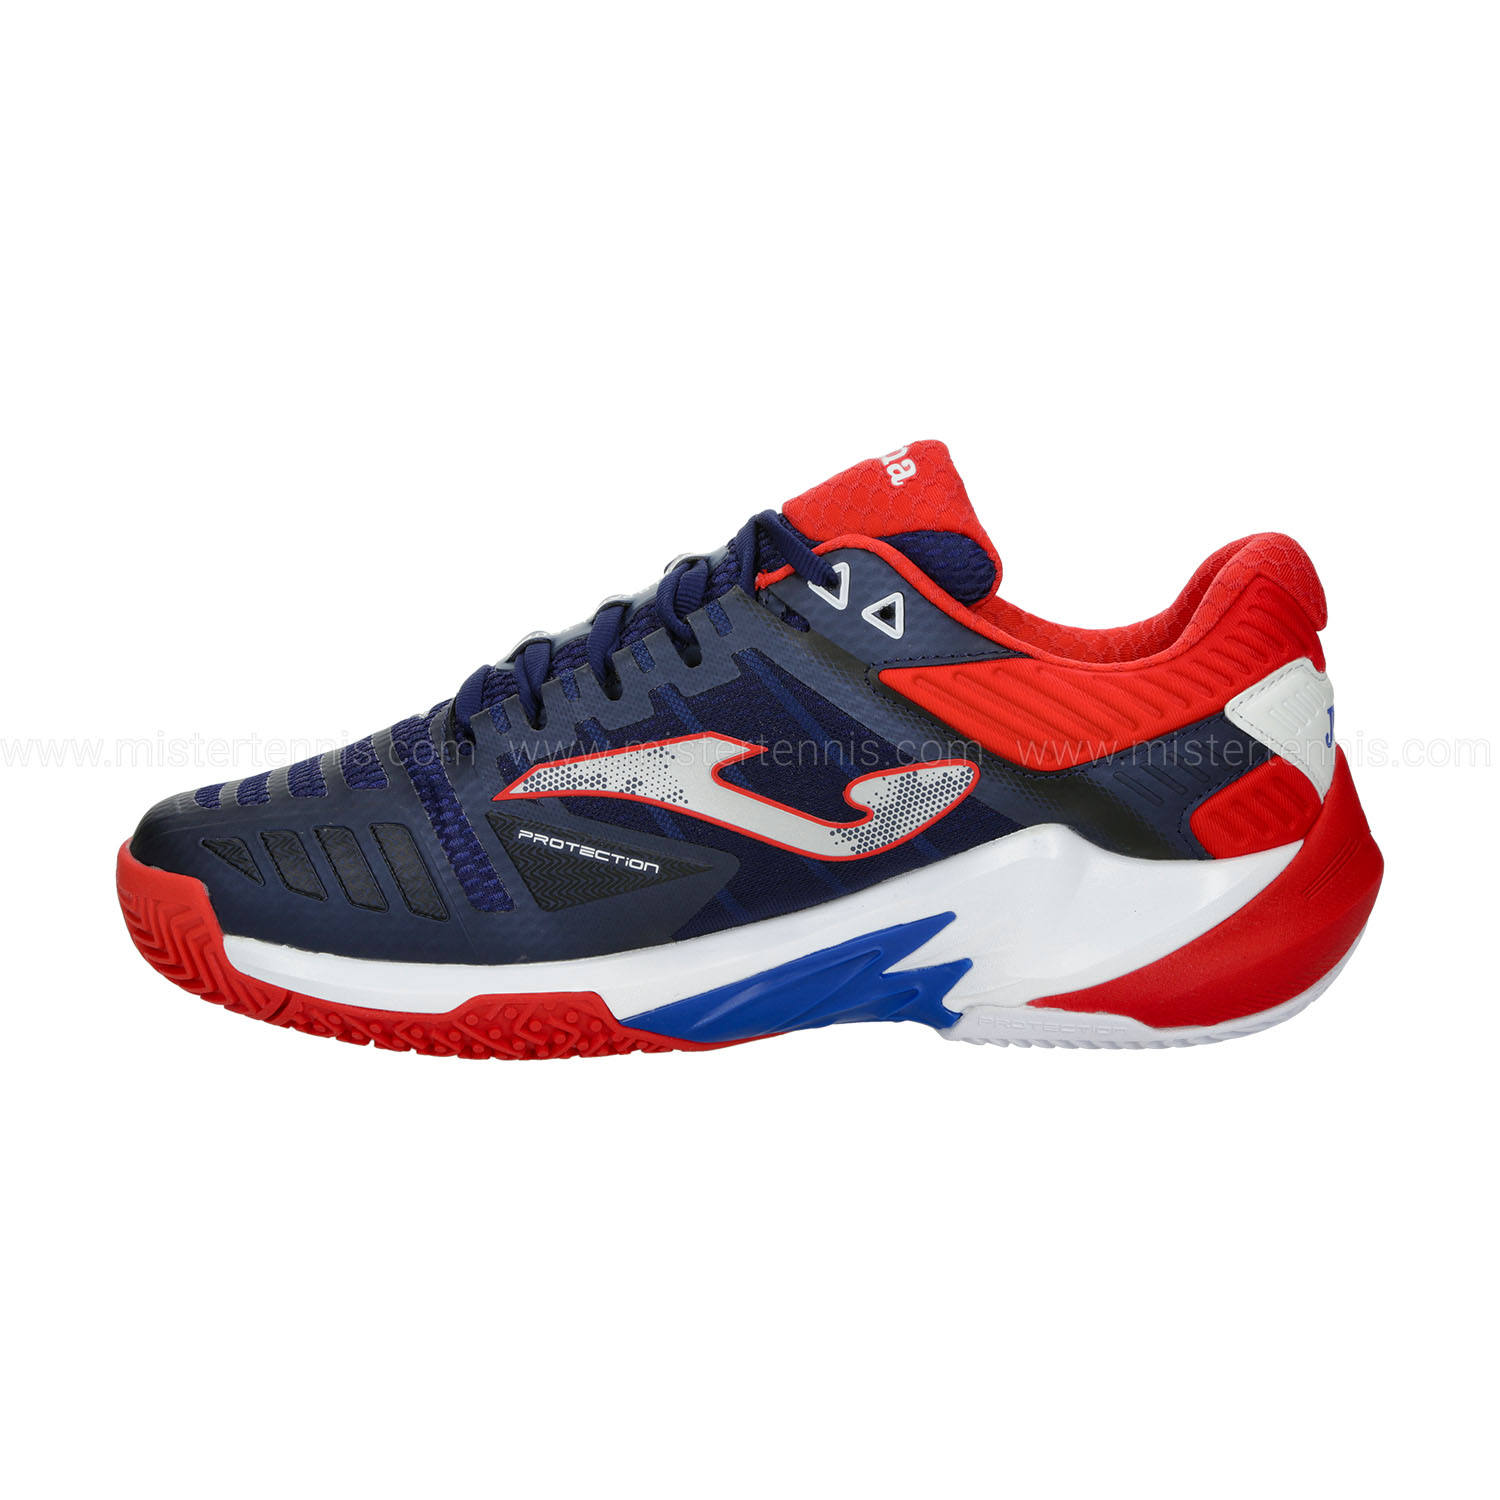 Joma Open WPT - Navy/Red